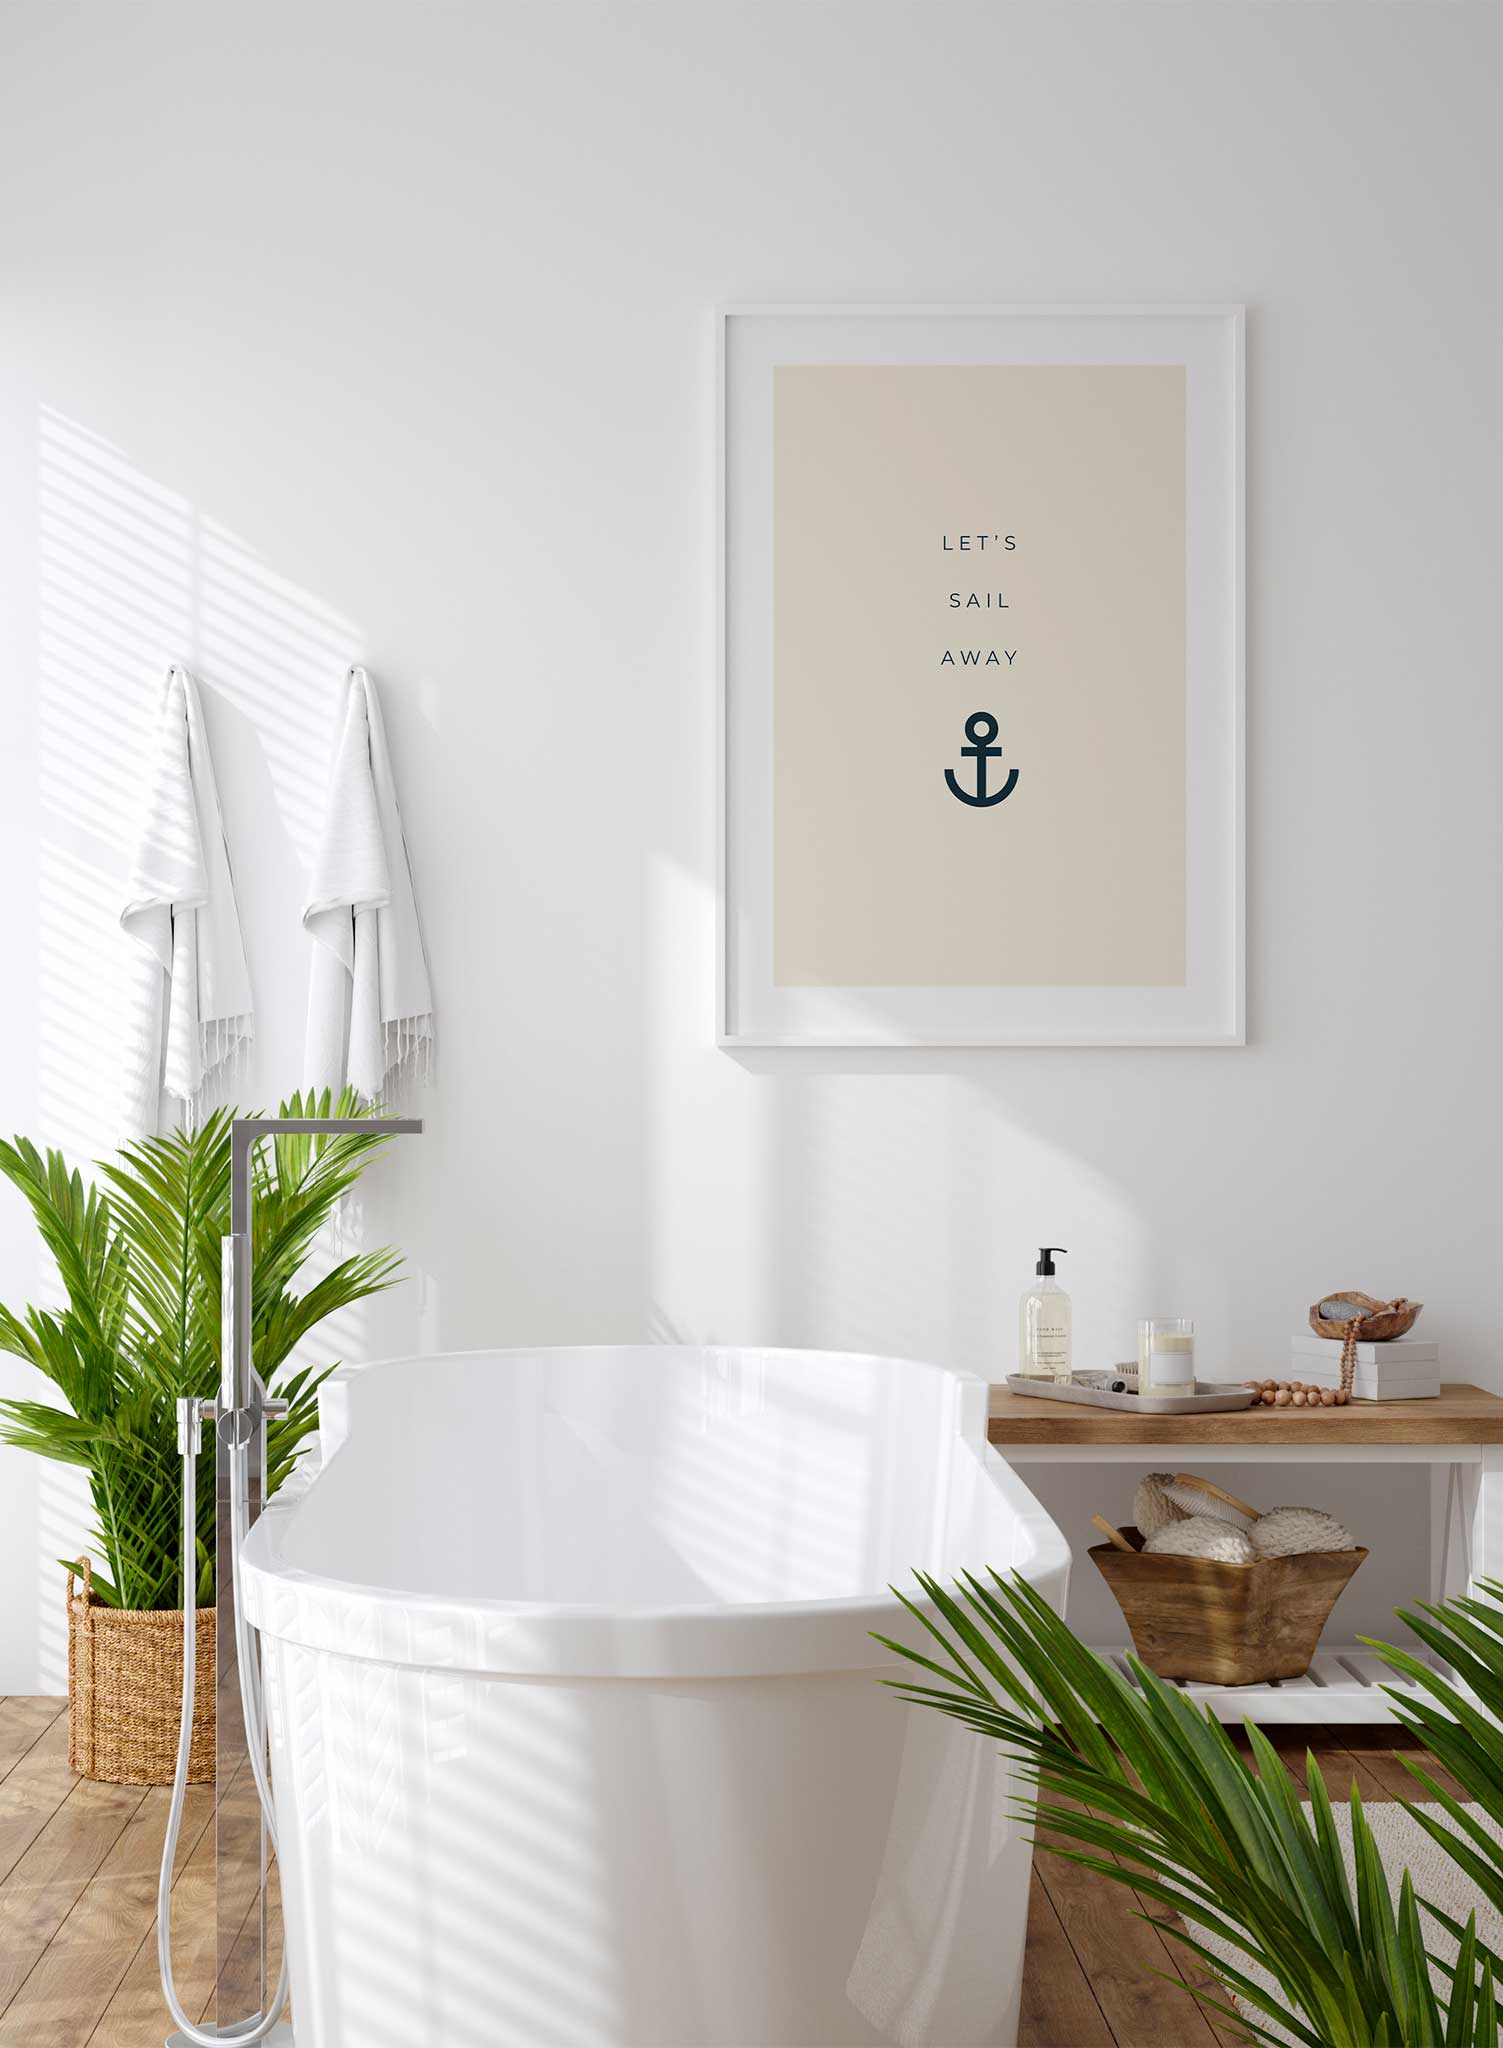 Sail Away is a minimalist typography of the words 'Let's sail away' with an anchor at the bottom by Opposite Wall.